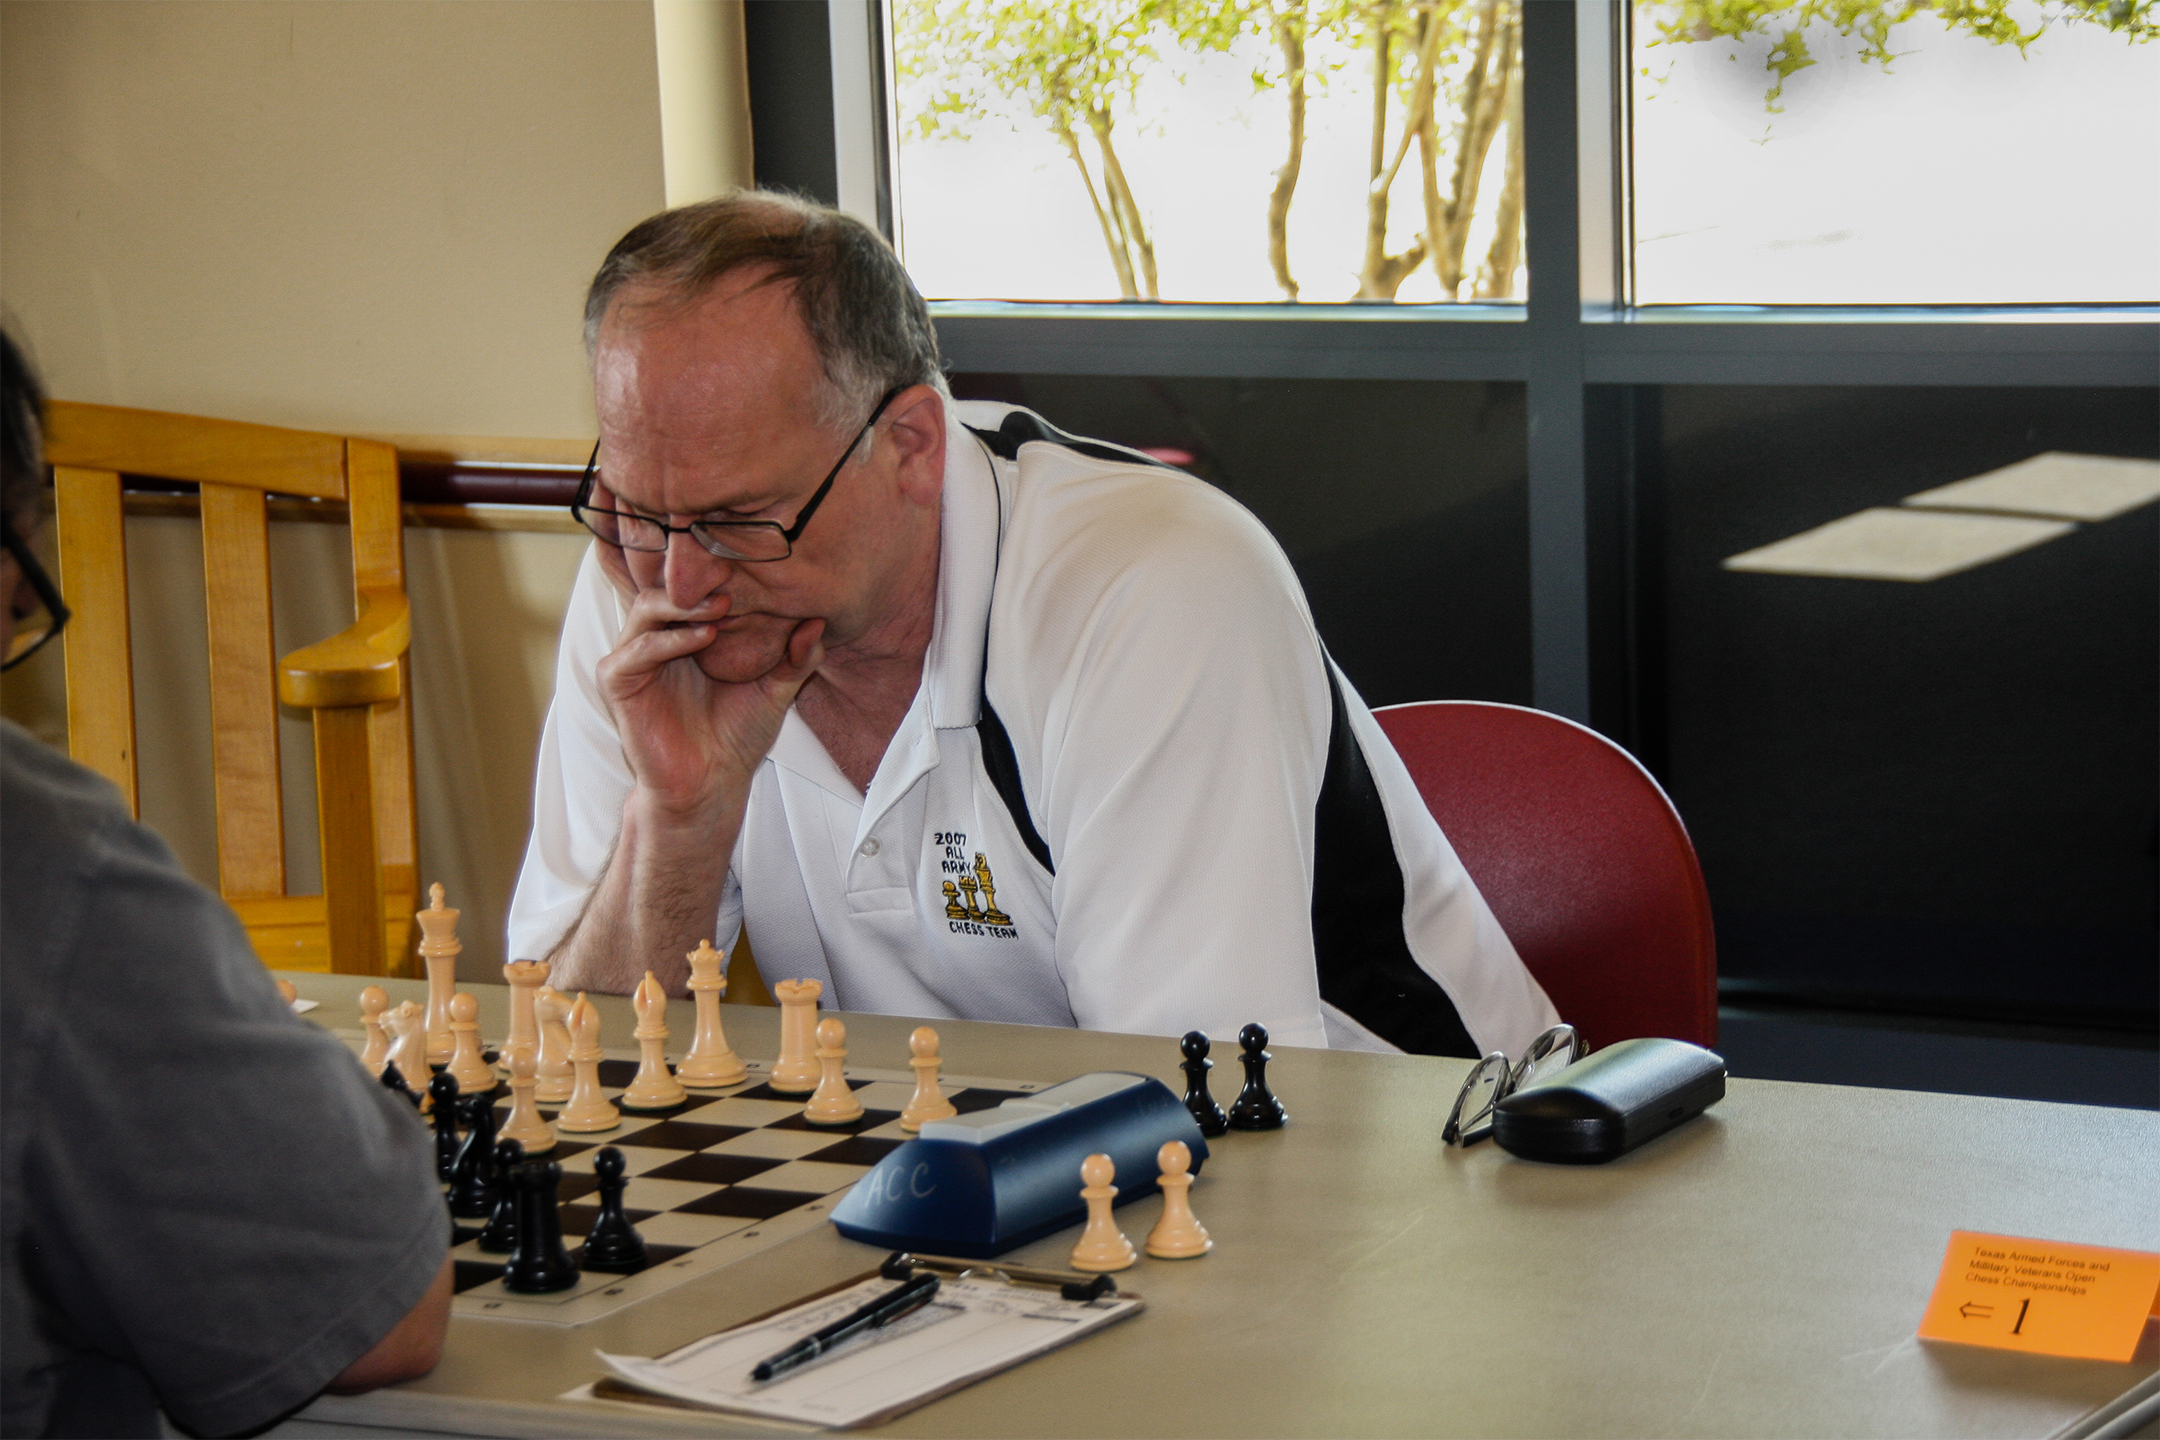 Army Retiree Mike Donovan was out-of-country and could not play.  However, he did the next best thing and called via Skype to wish everyone well.  Photo from Round 2 of the 2017 Texas Armed Forces and Military Veterans Open Chess Championships by Danny Dunn.